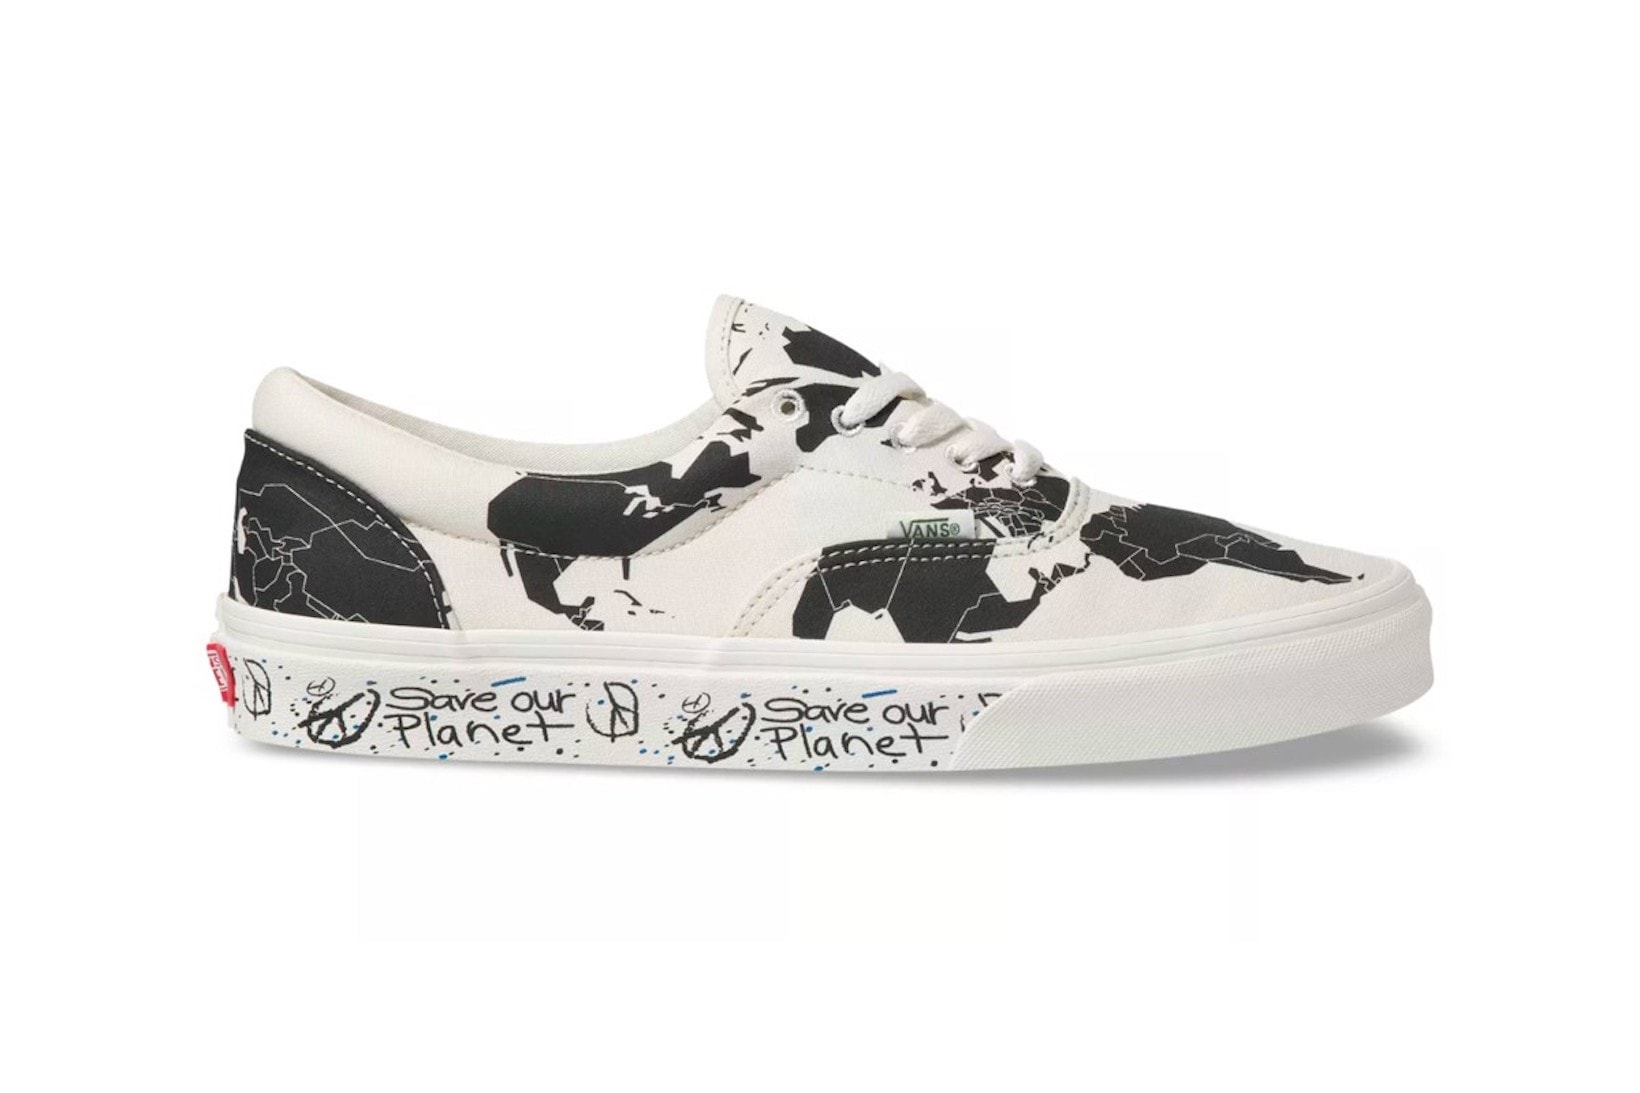 vans save our planet collection era sneakers sustainability shoes footwear black white